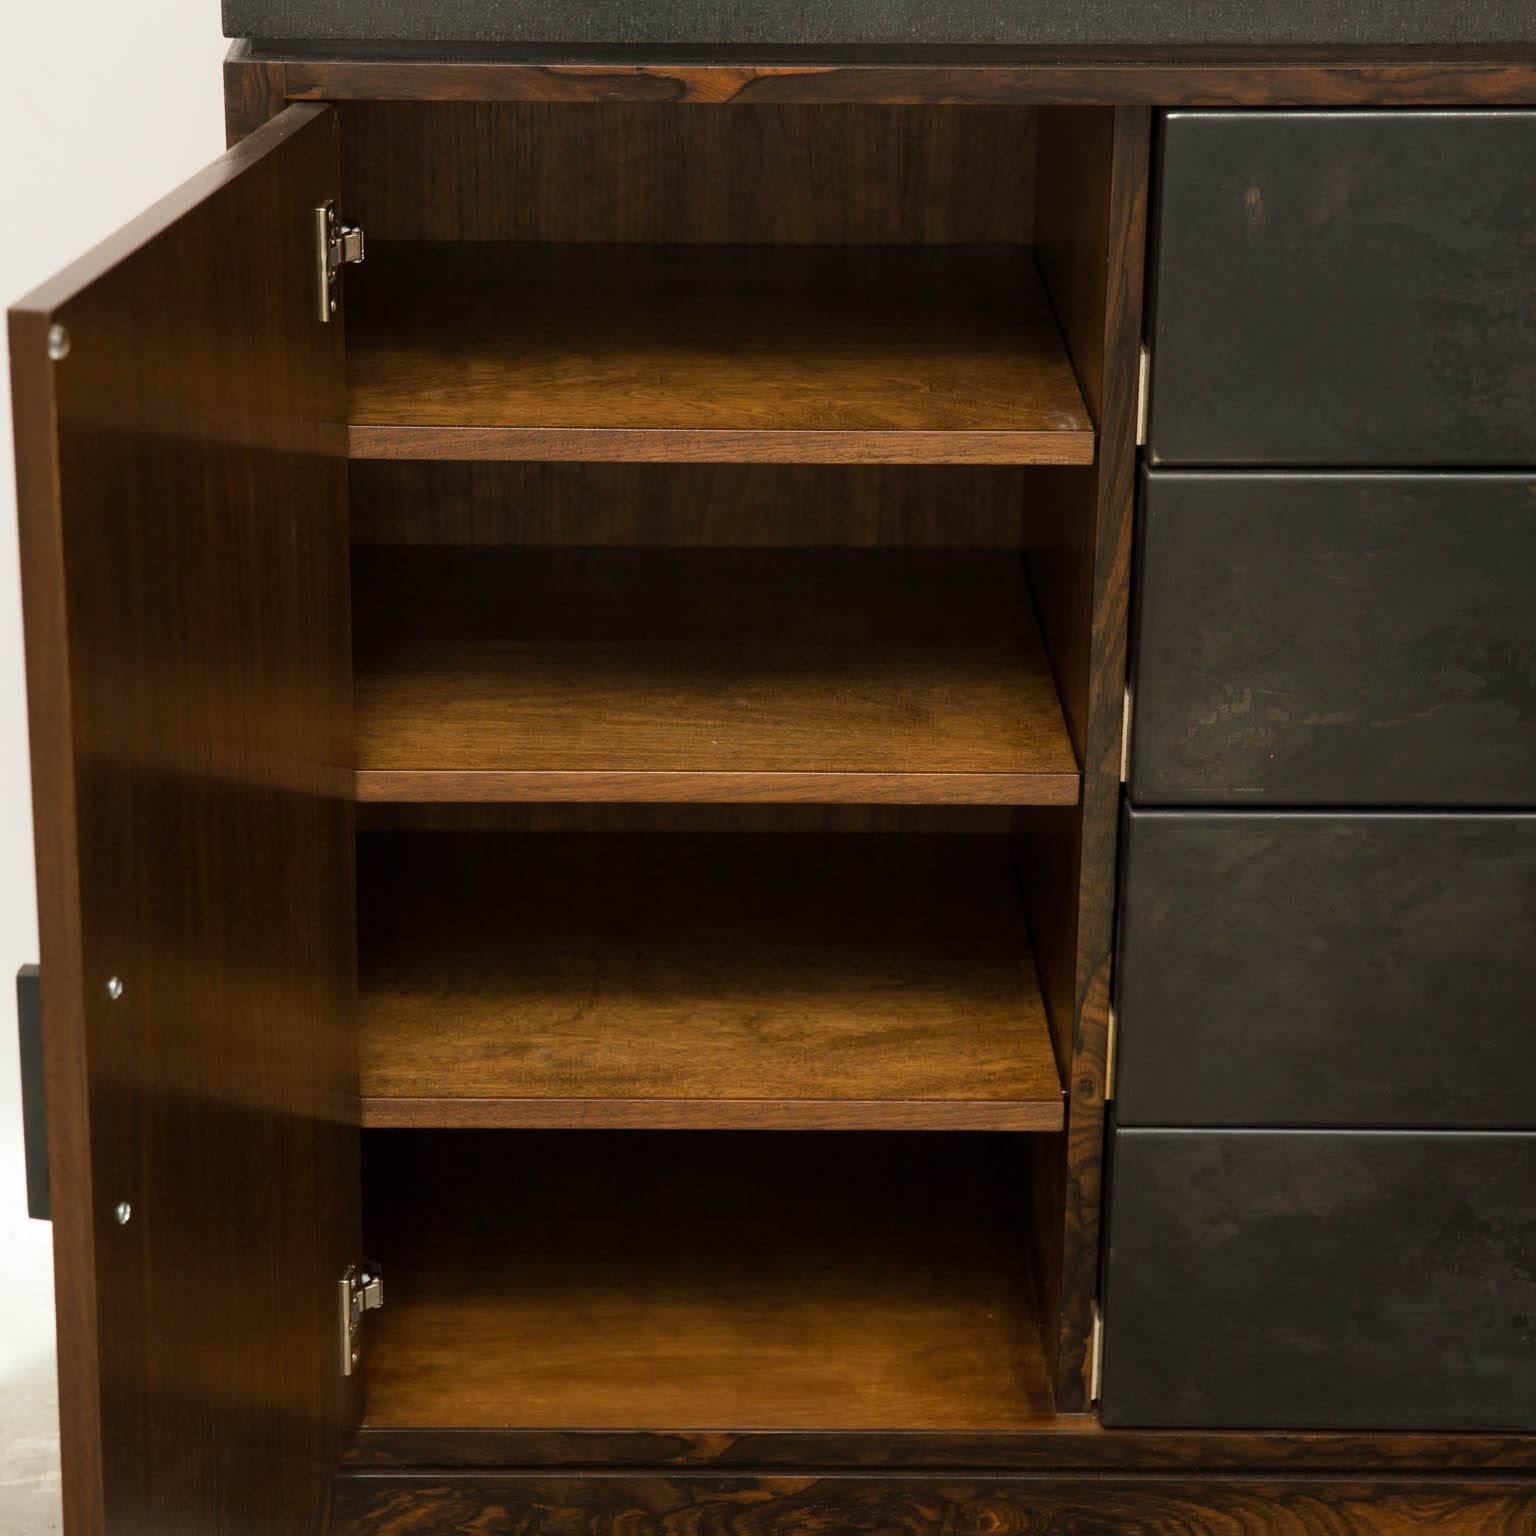 Dramatic custom piece by Gregory Clark with black granite top, zircote wood doors and frame with patinated steel drawers. Doors feature soft close hinges and drawers have self-closing runners. Cool storage worthy of your equally cool wardrobe.